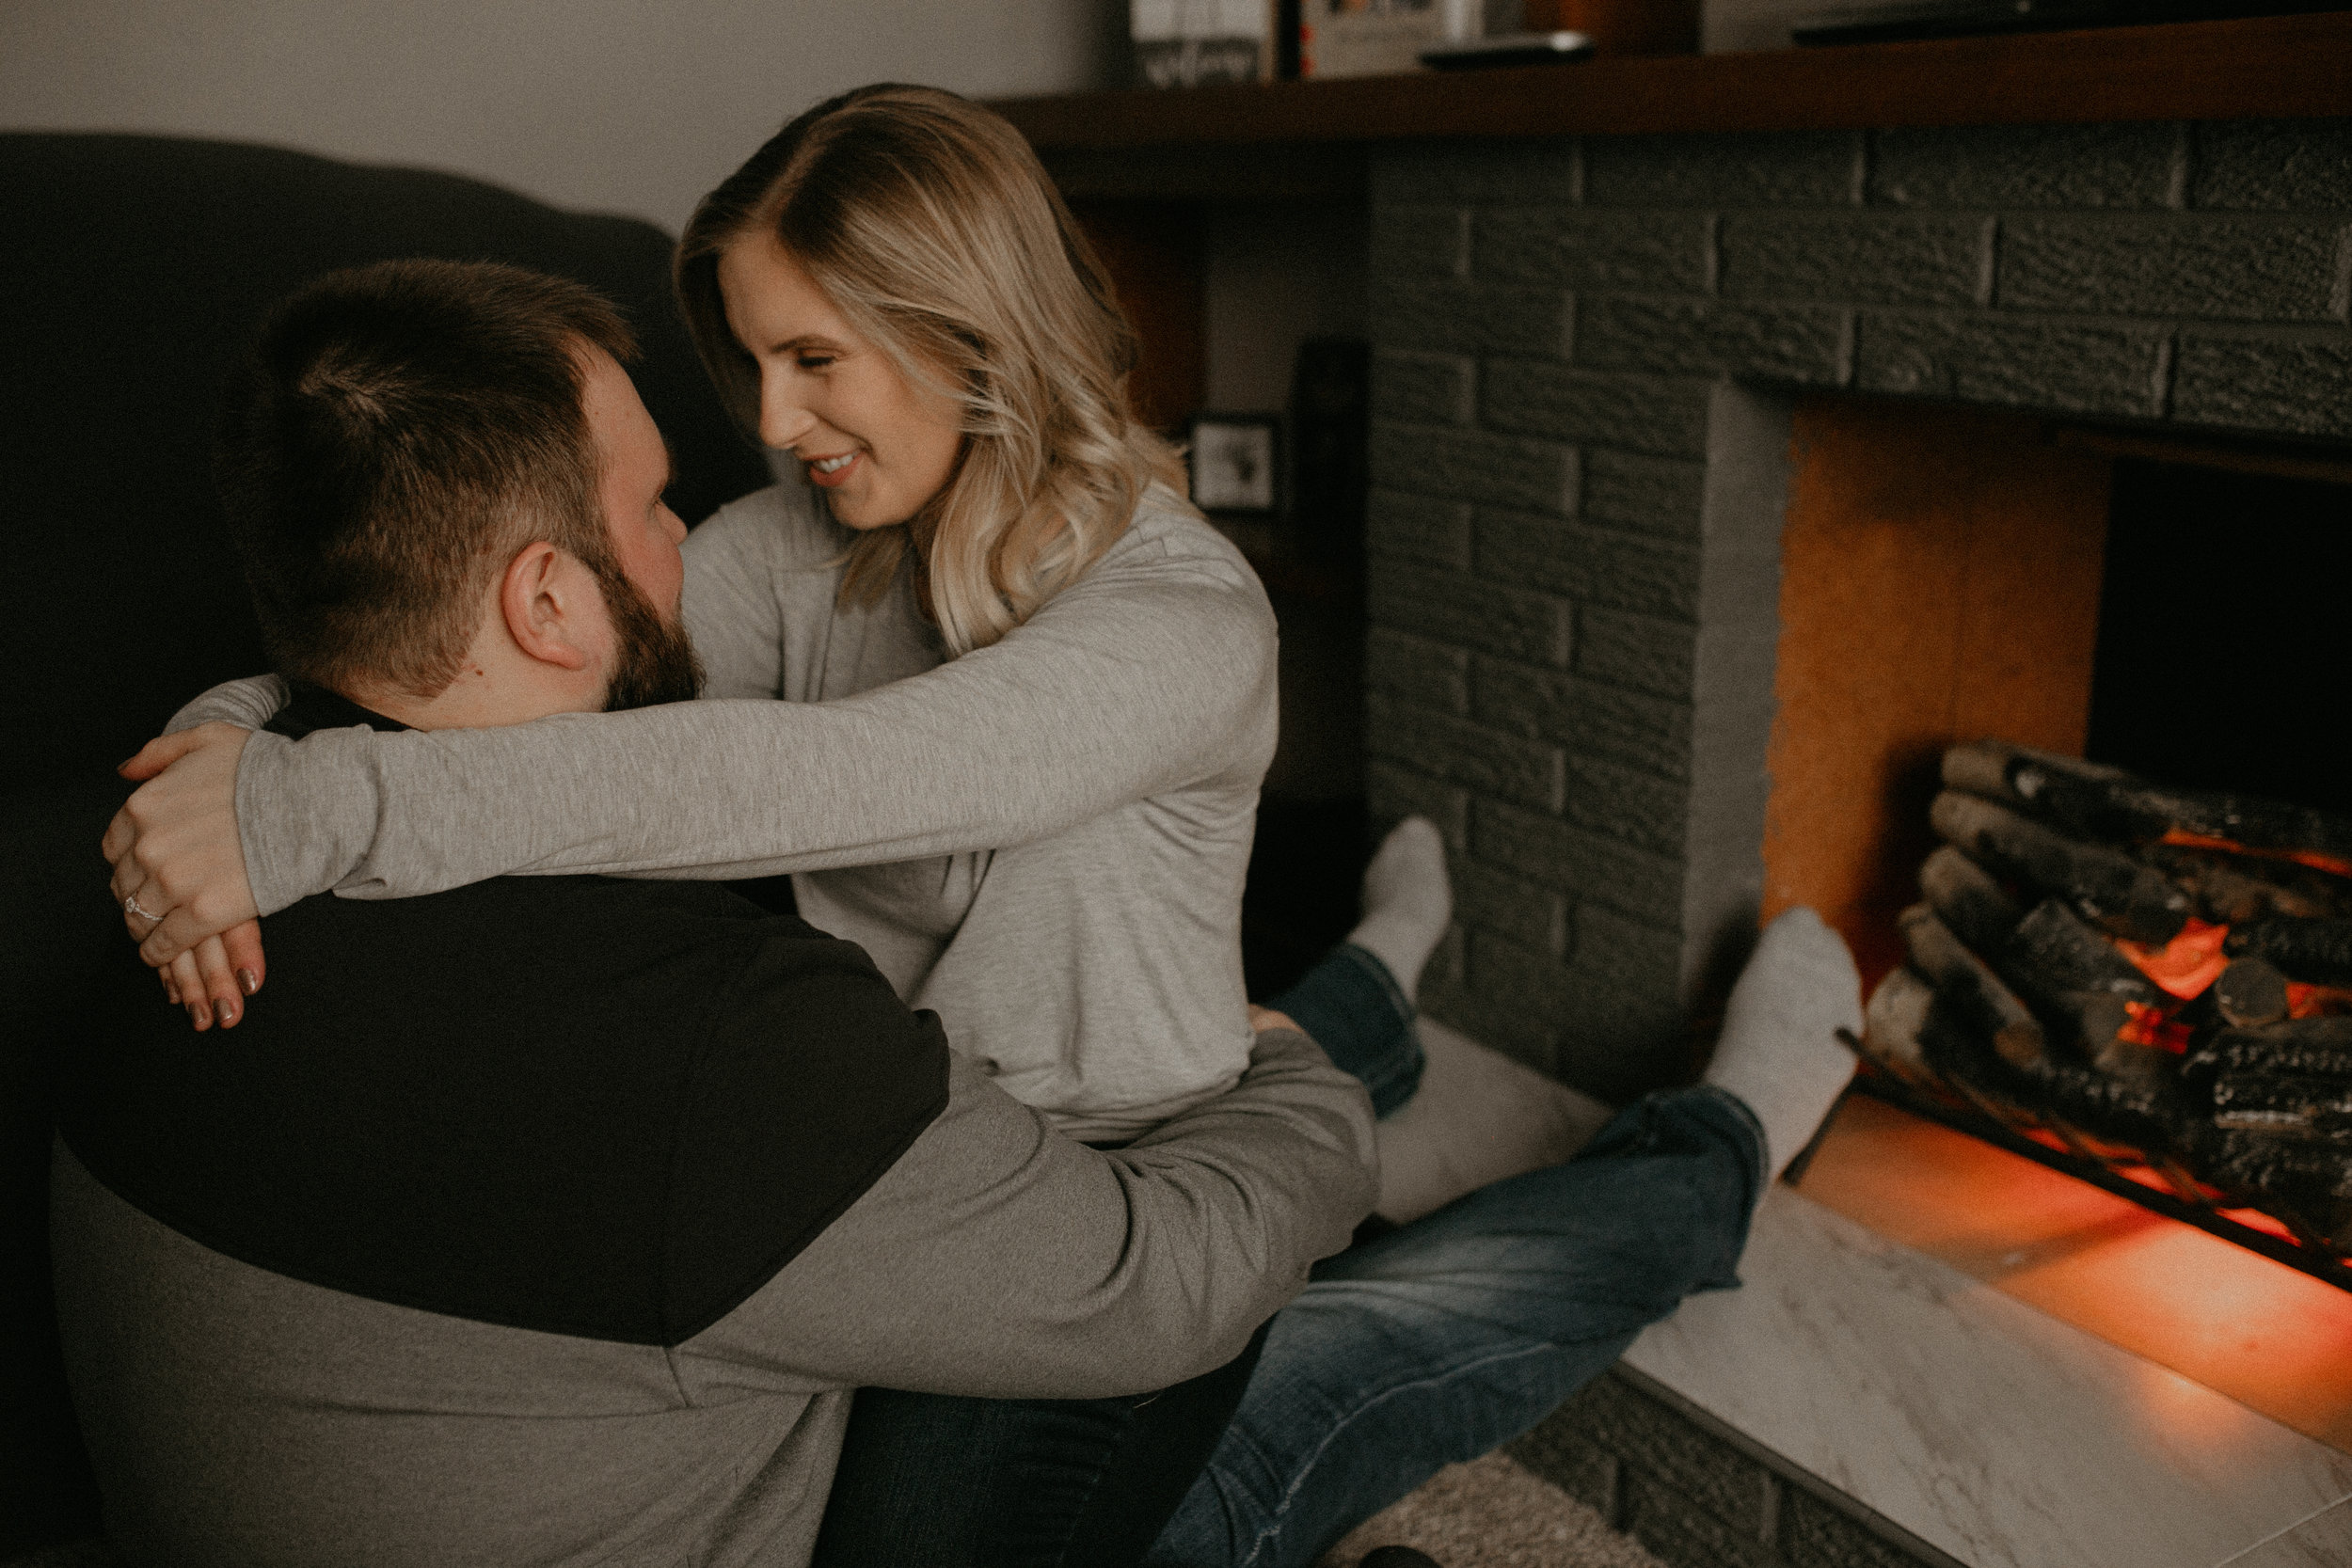  couple cozies up and snuggles near fireplace during lifestyle engagement session 